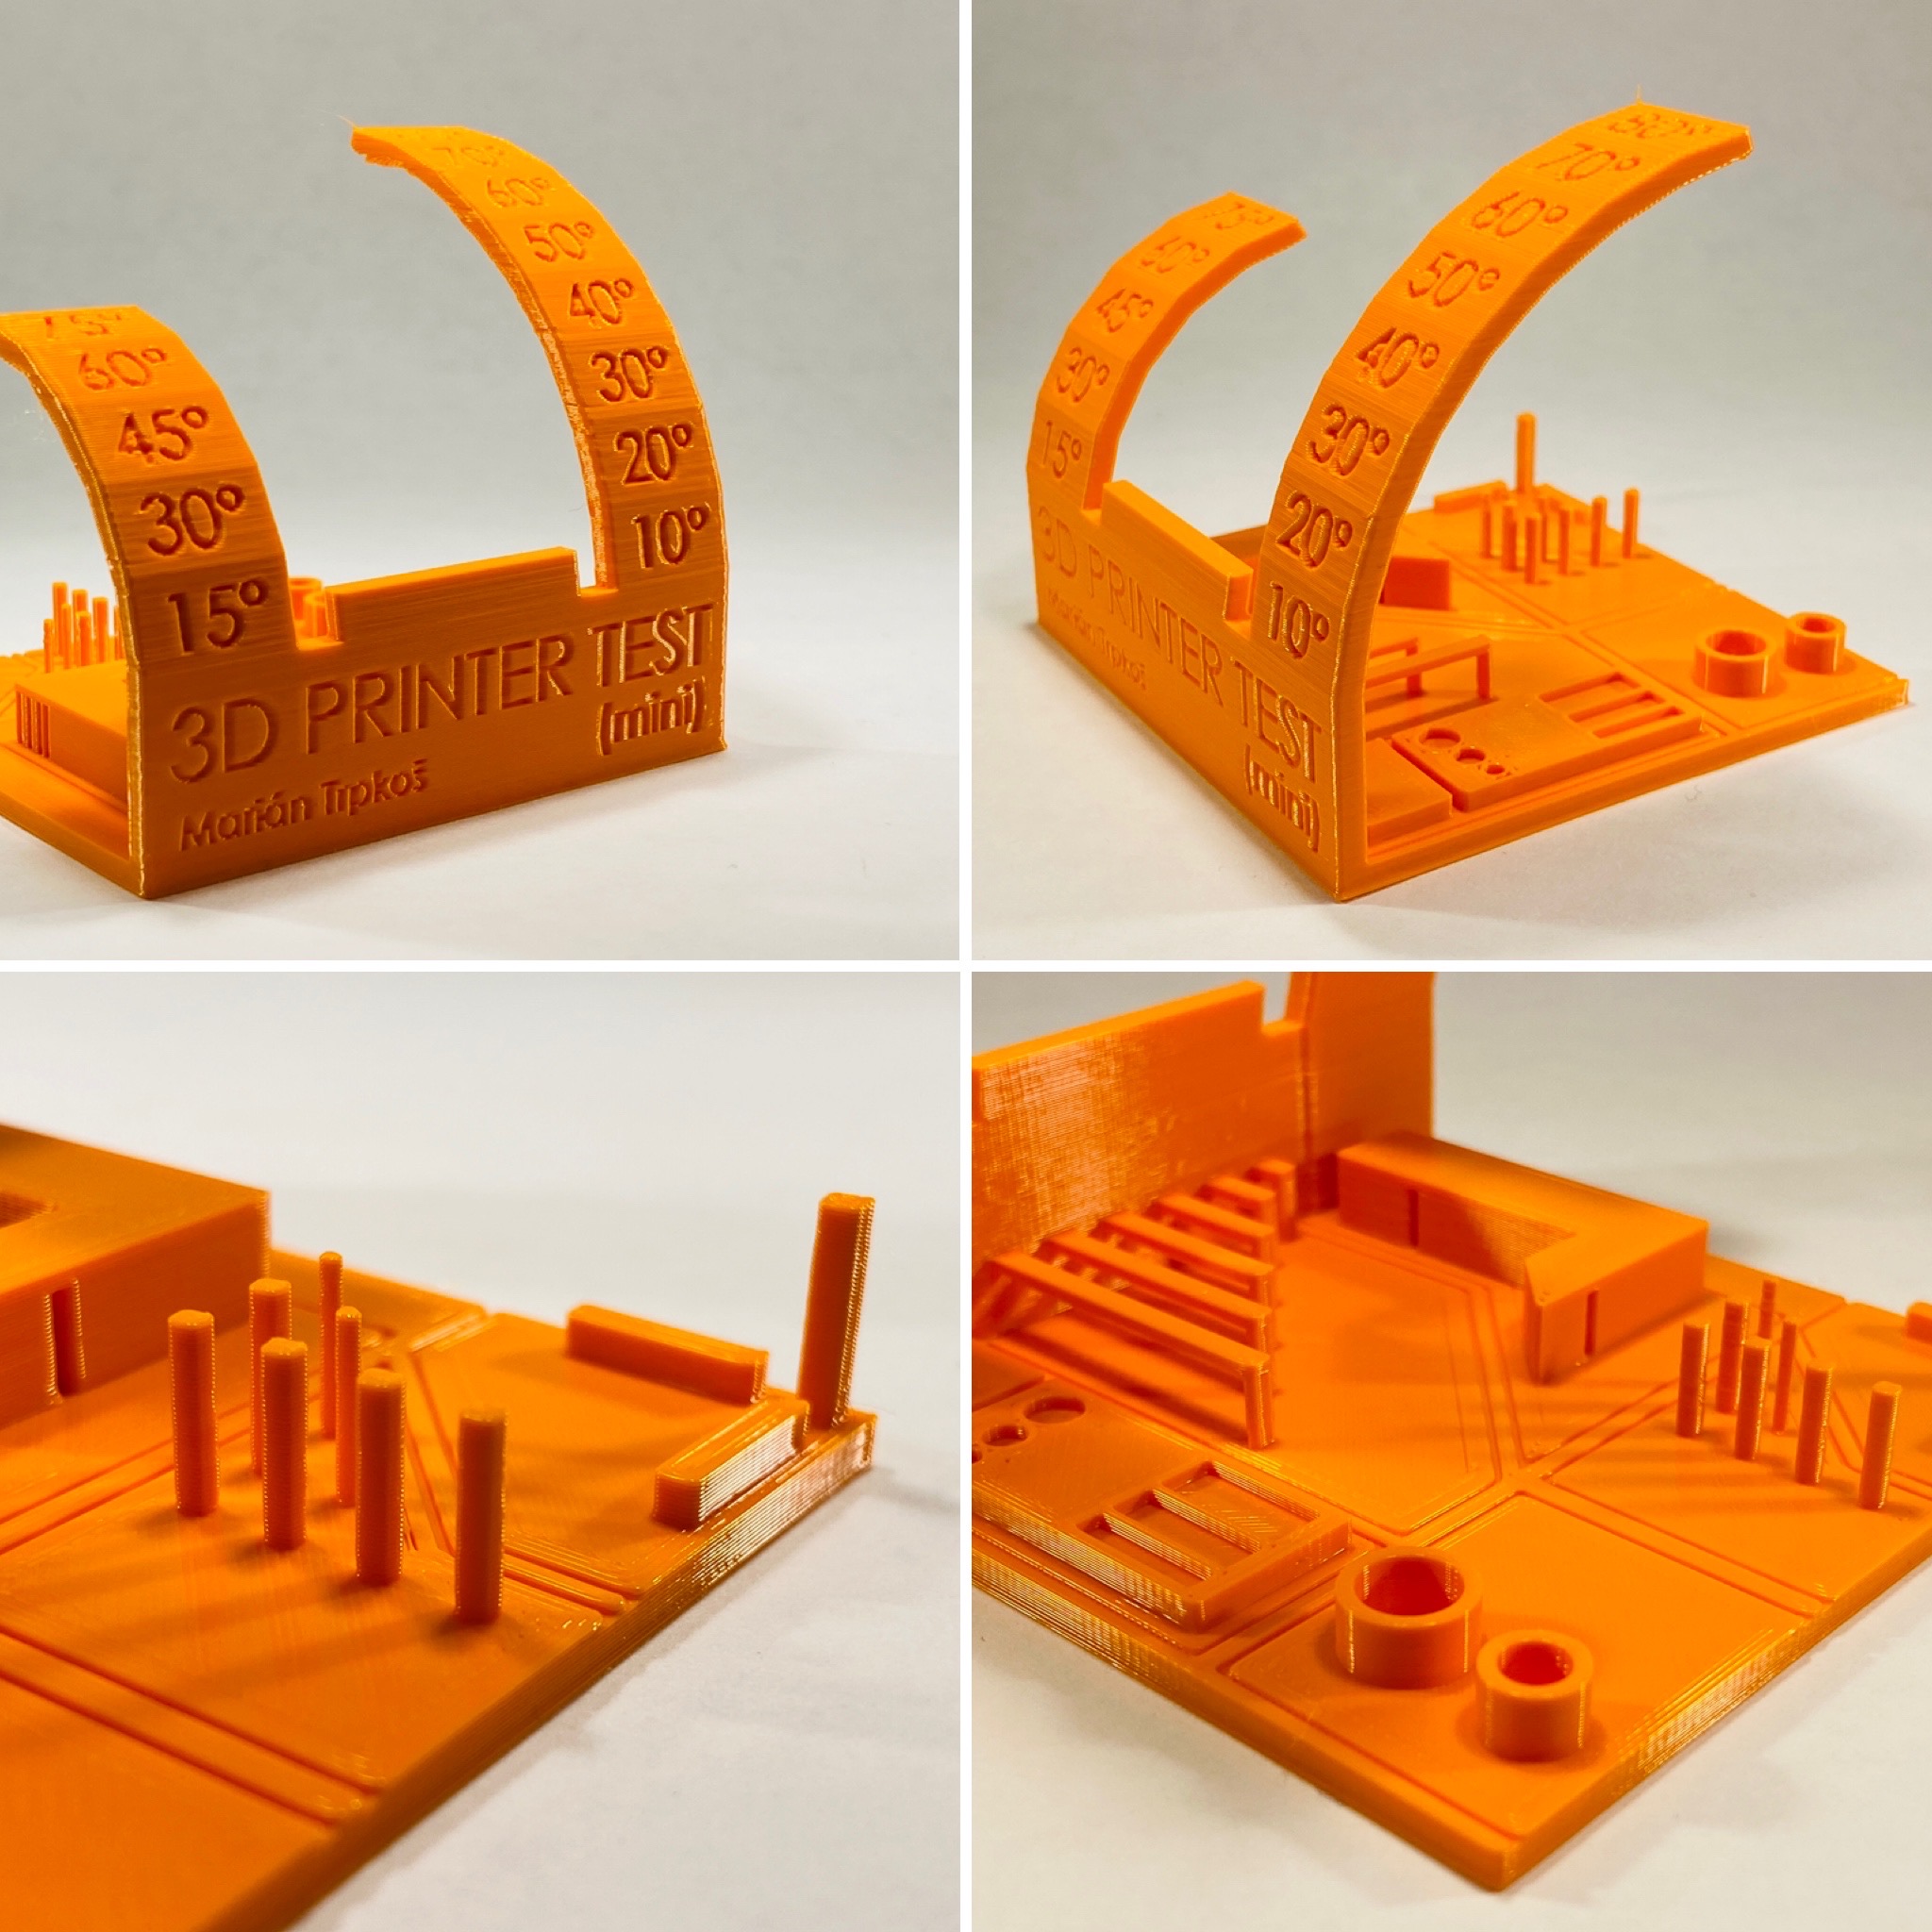 Complete 3D Printer test all in one